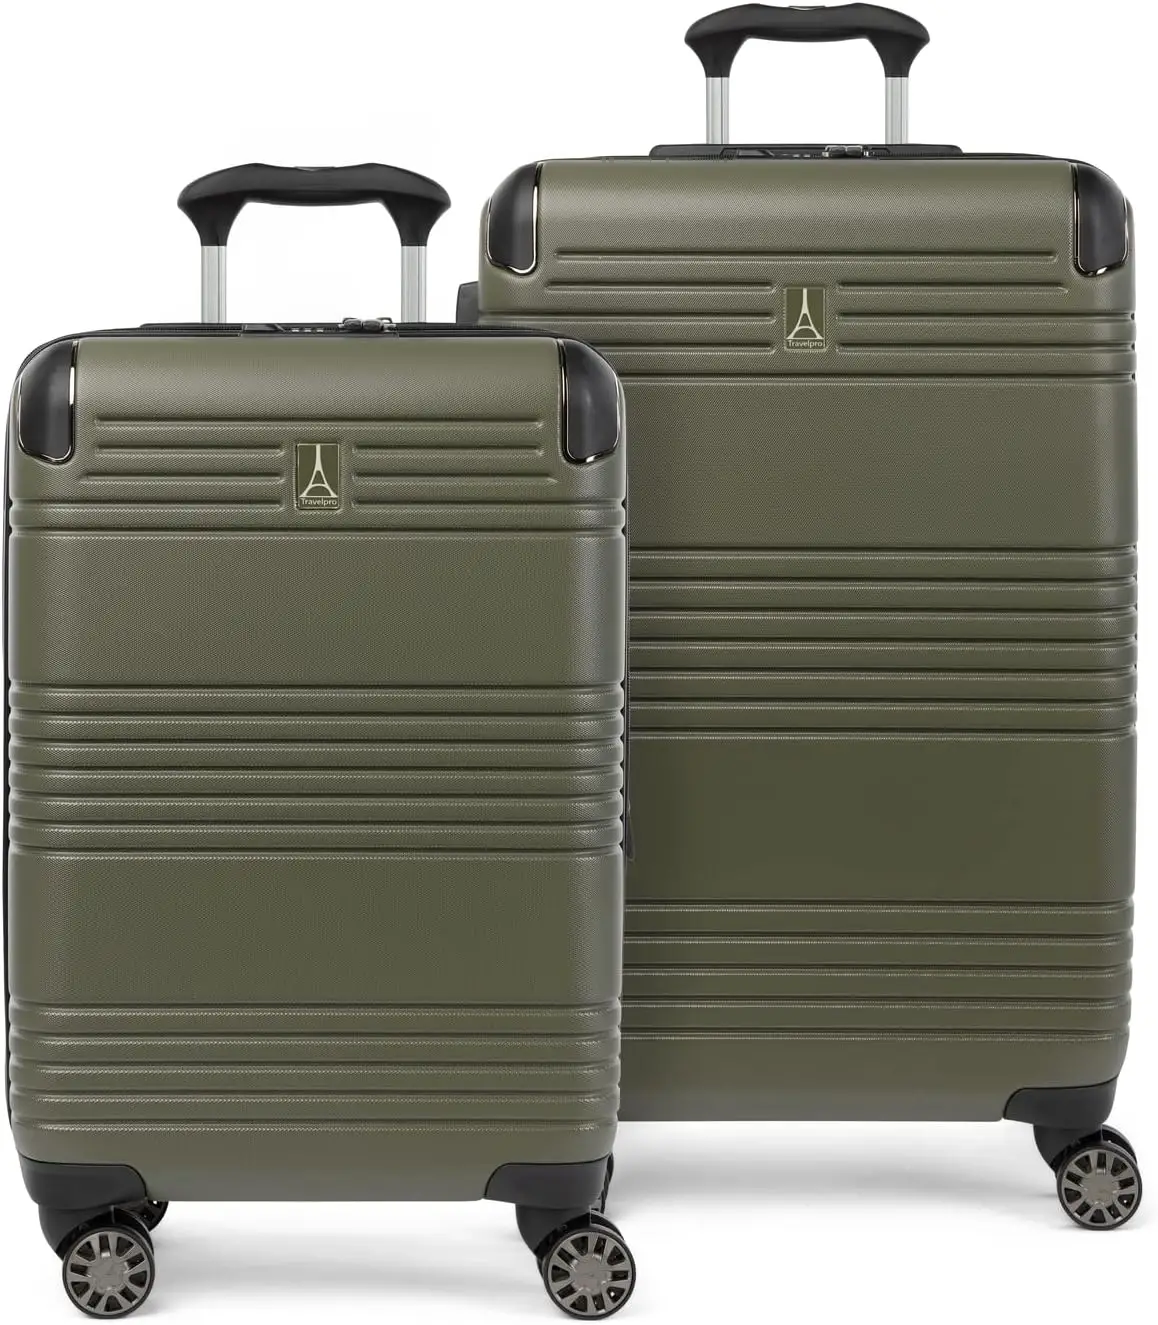 Where to Buy Travelpro Luggage (FOR CHEAP)